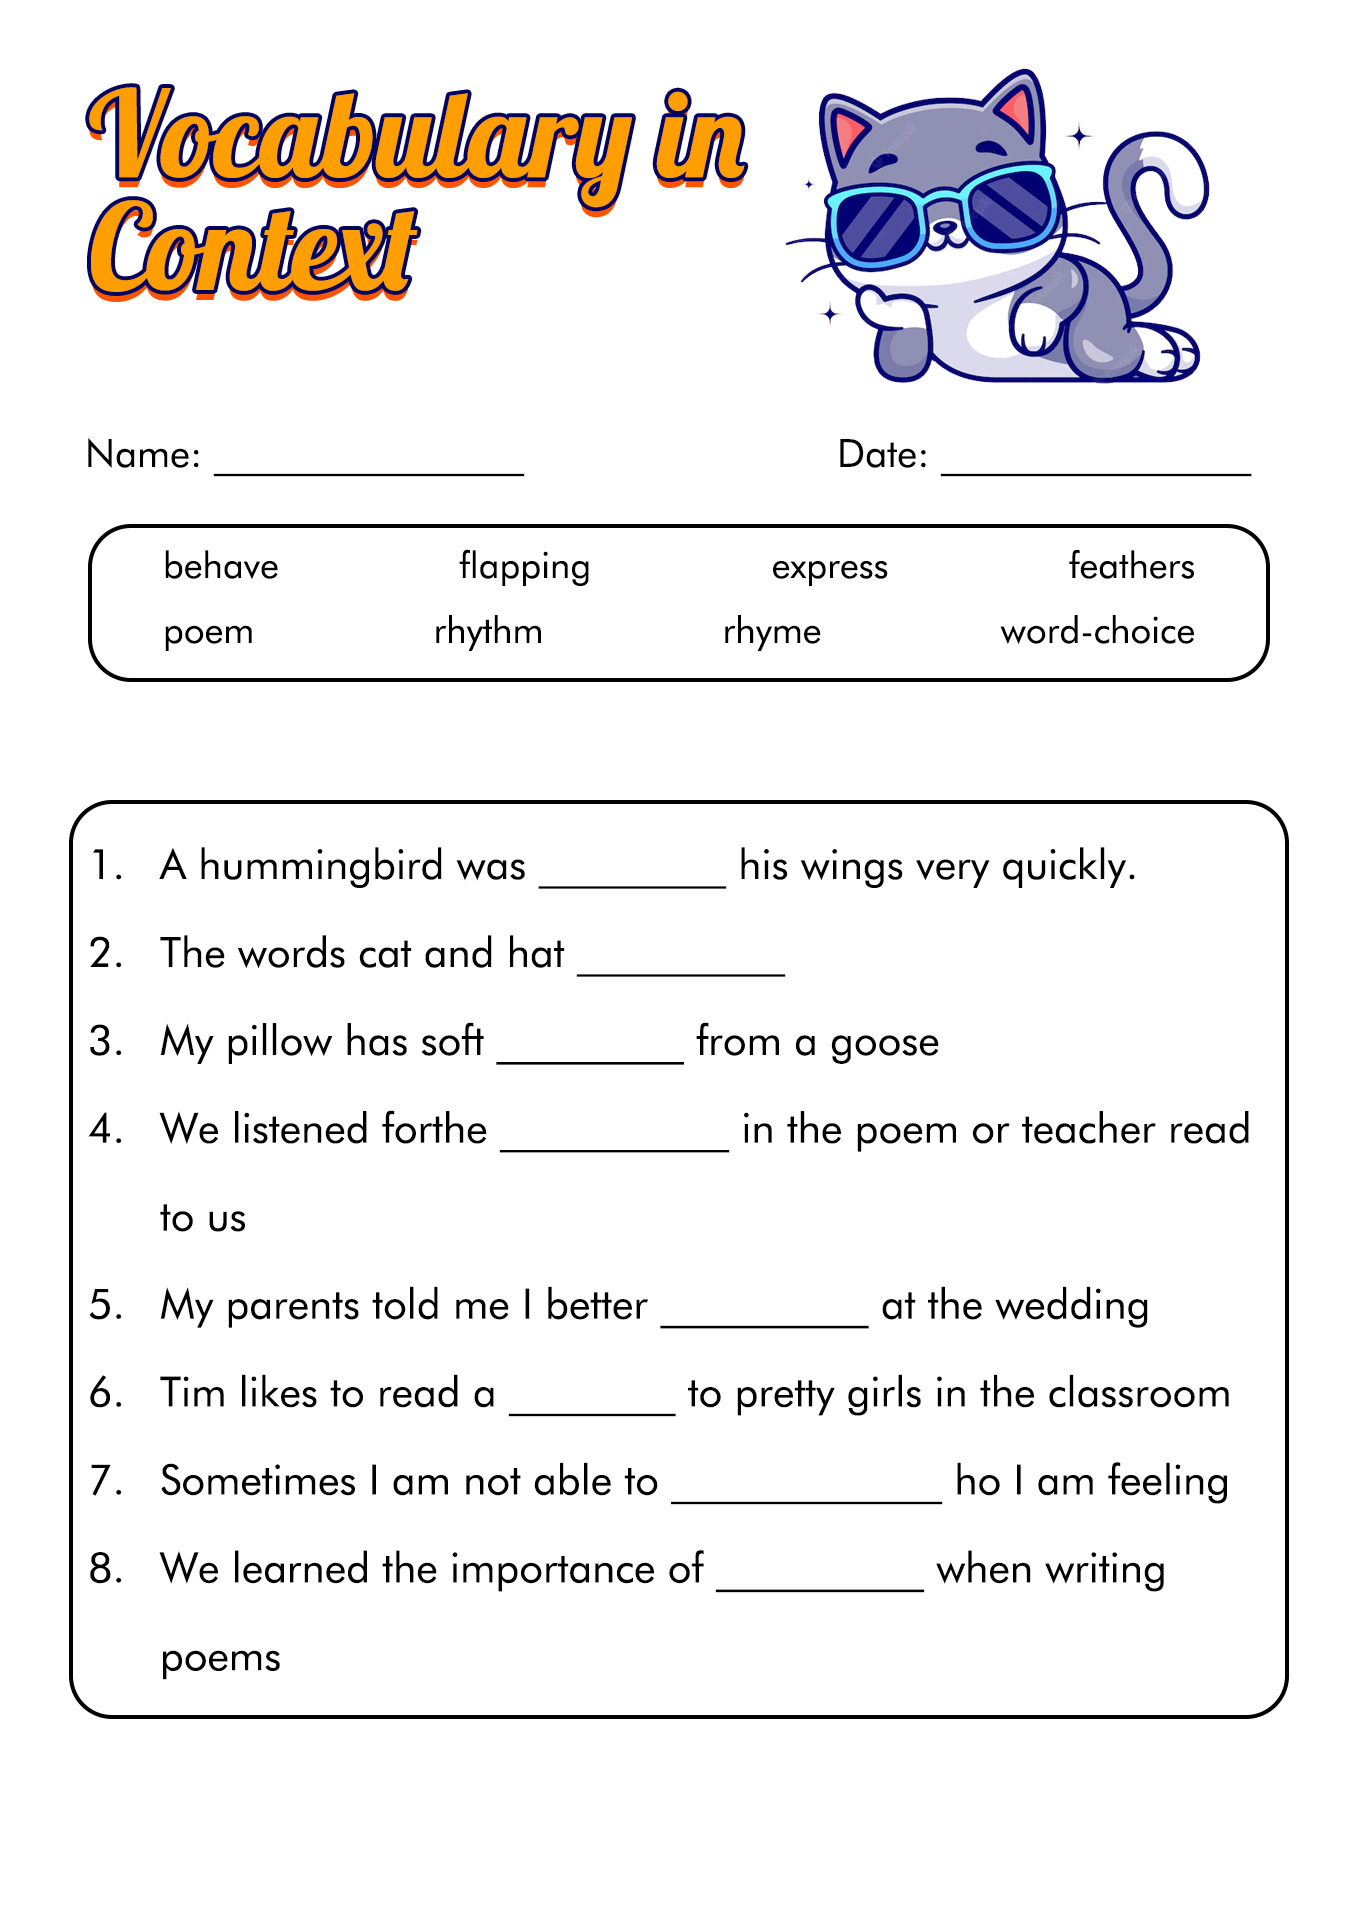 worksheets-for-class-2-english-cbse-class-2-english-worksheets-question-papers-one-and-many